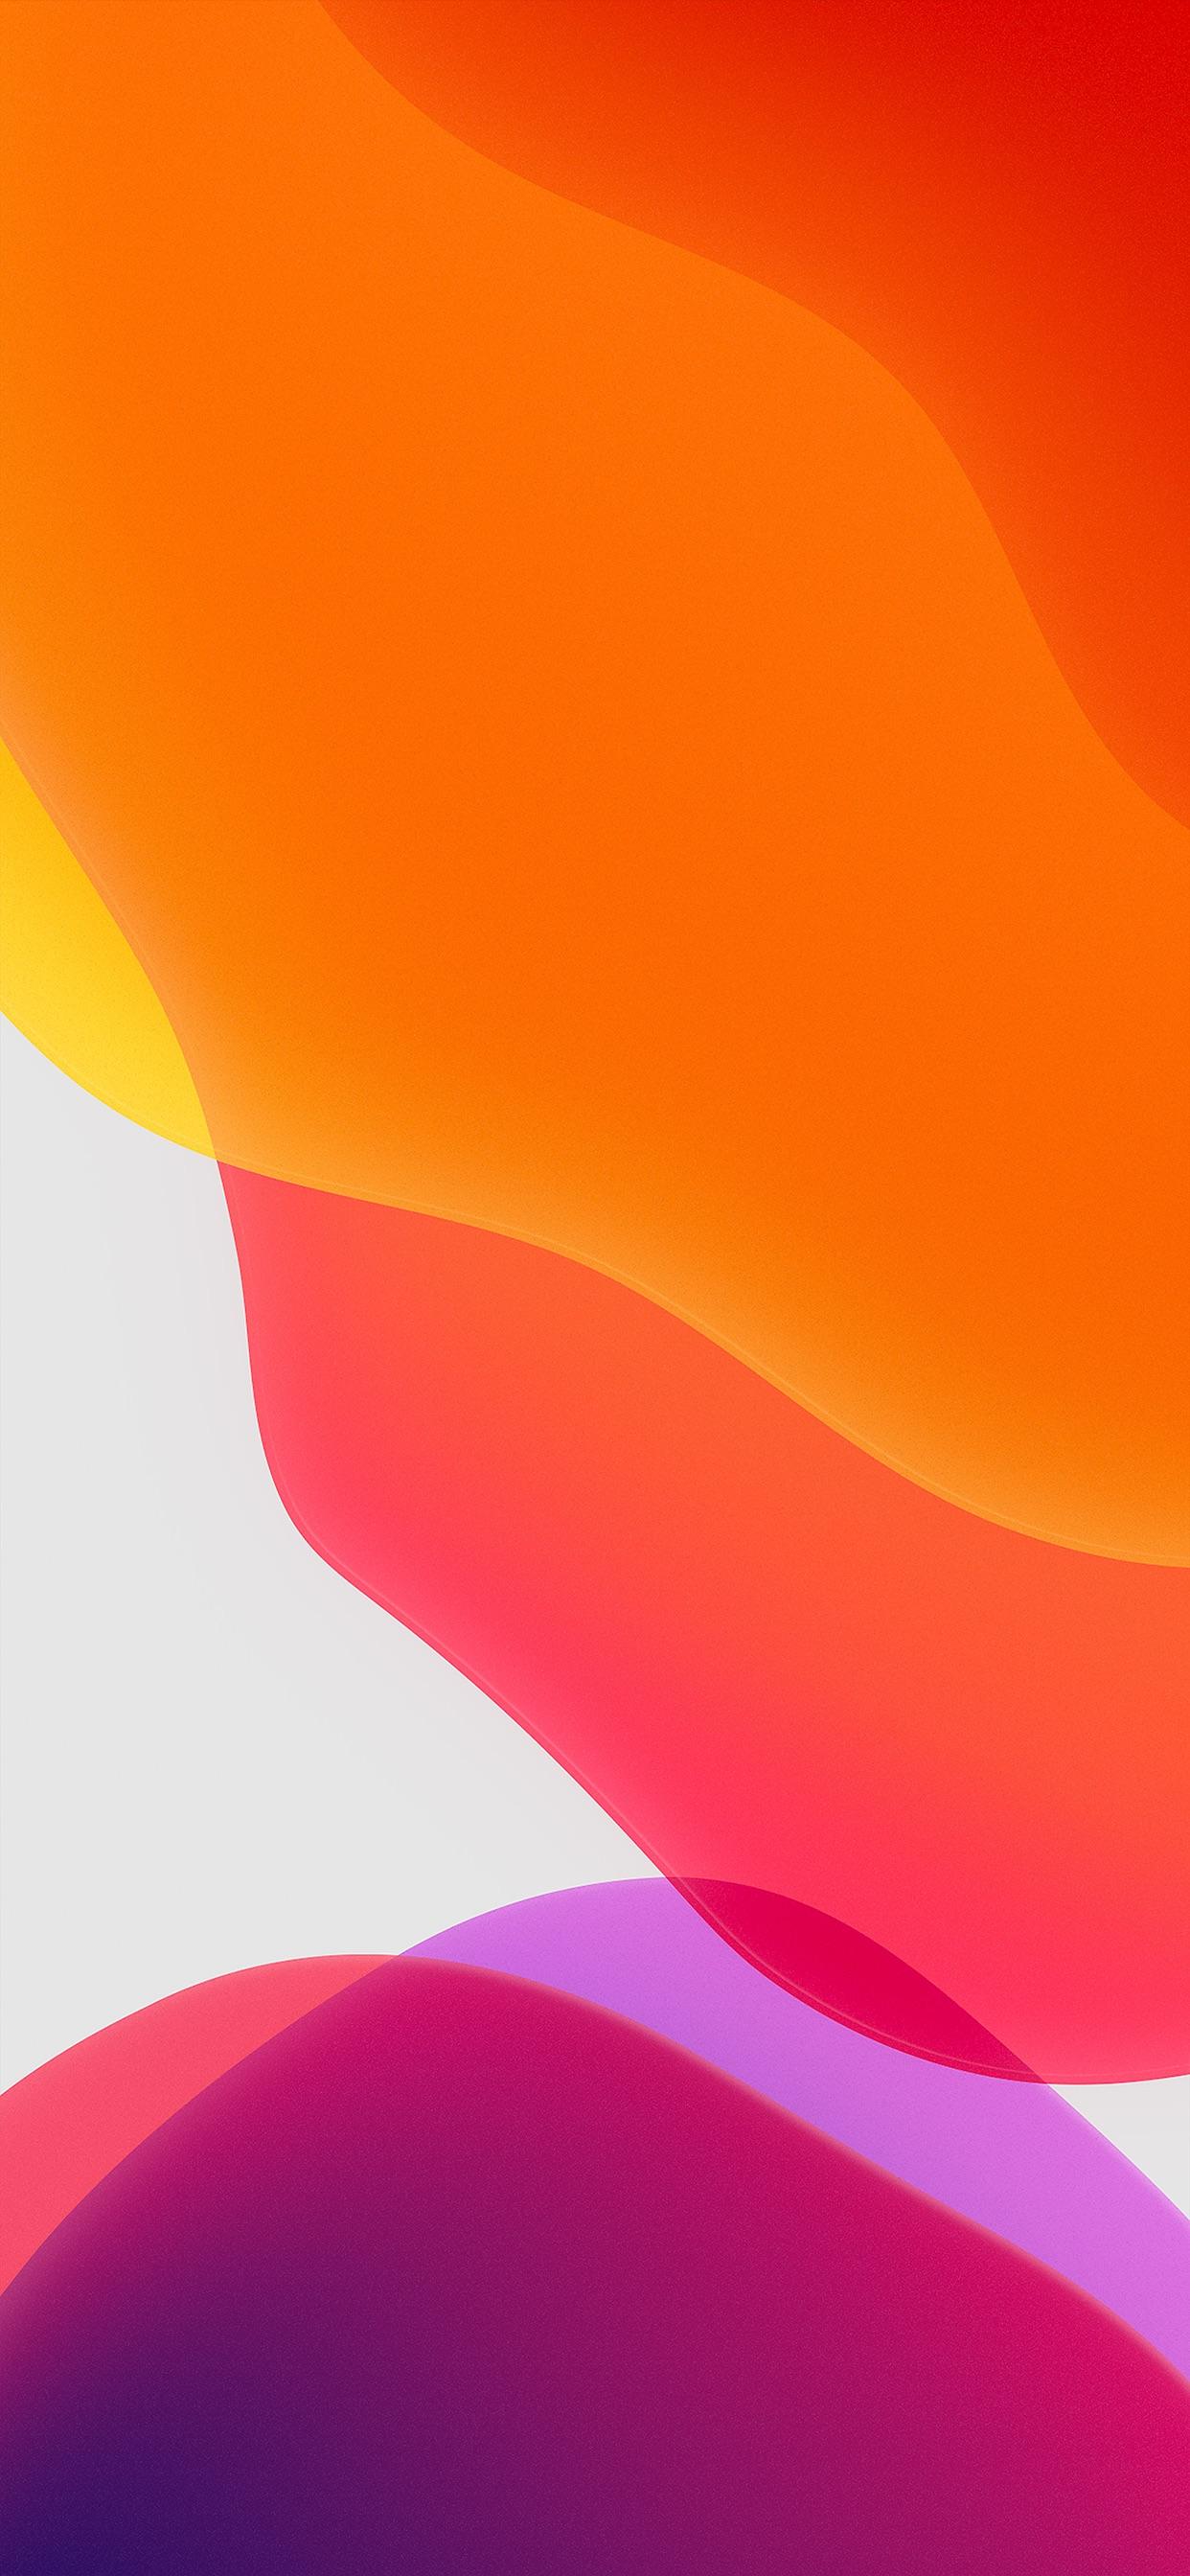 34 Classic iOS Wallpapers For iPhone You Should Download